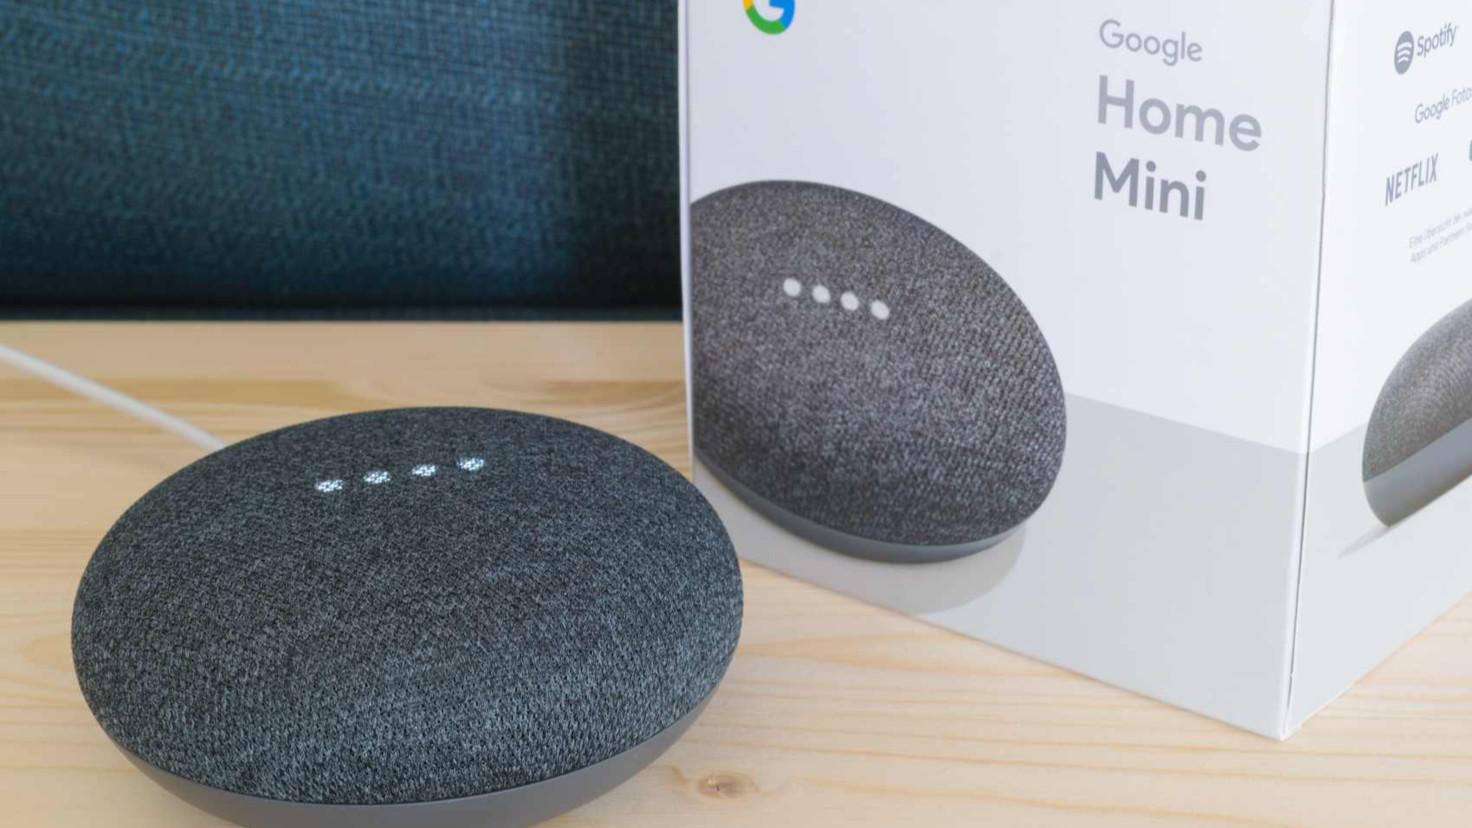 Spotify to give away free Google Home speakers to its Premium subscribers 